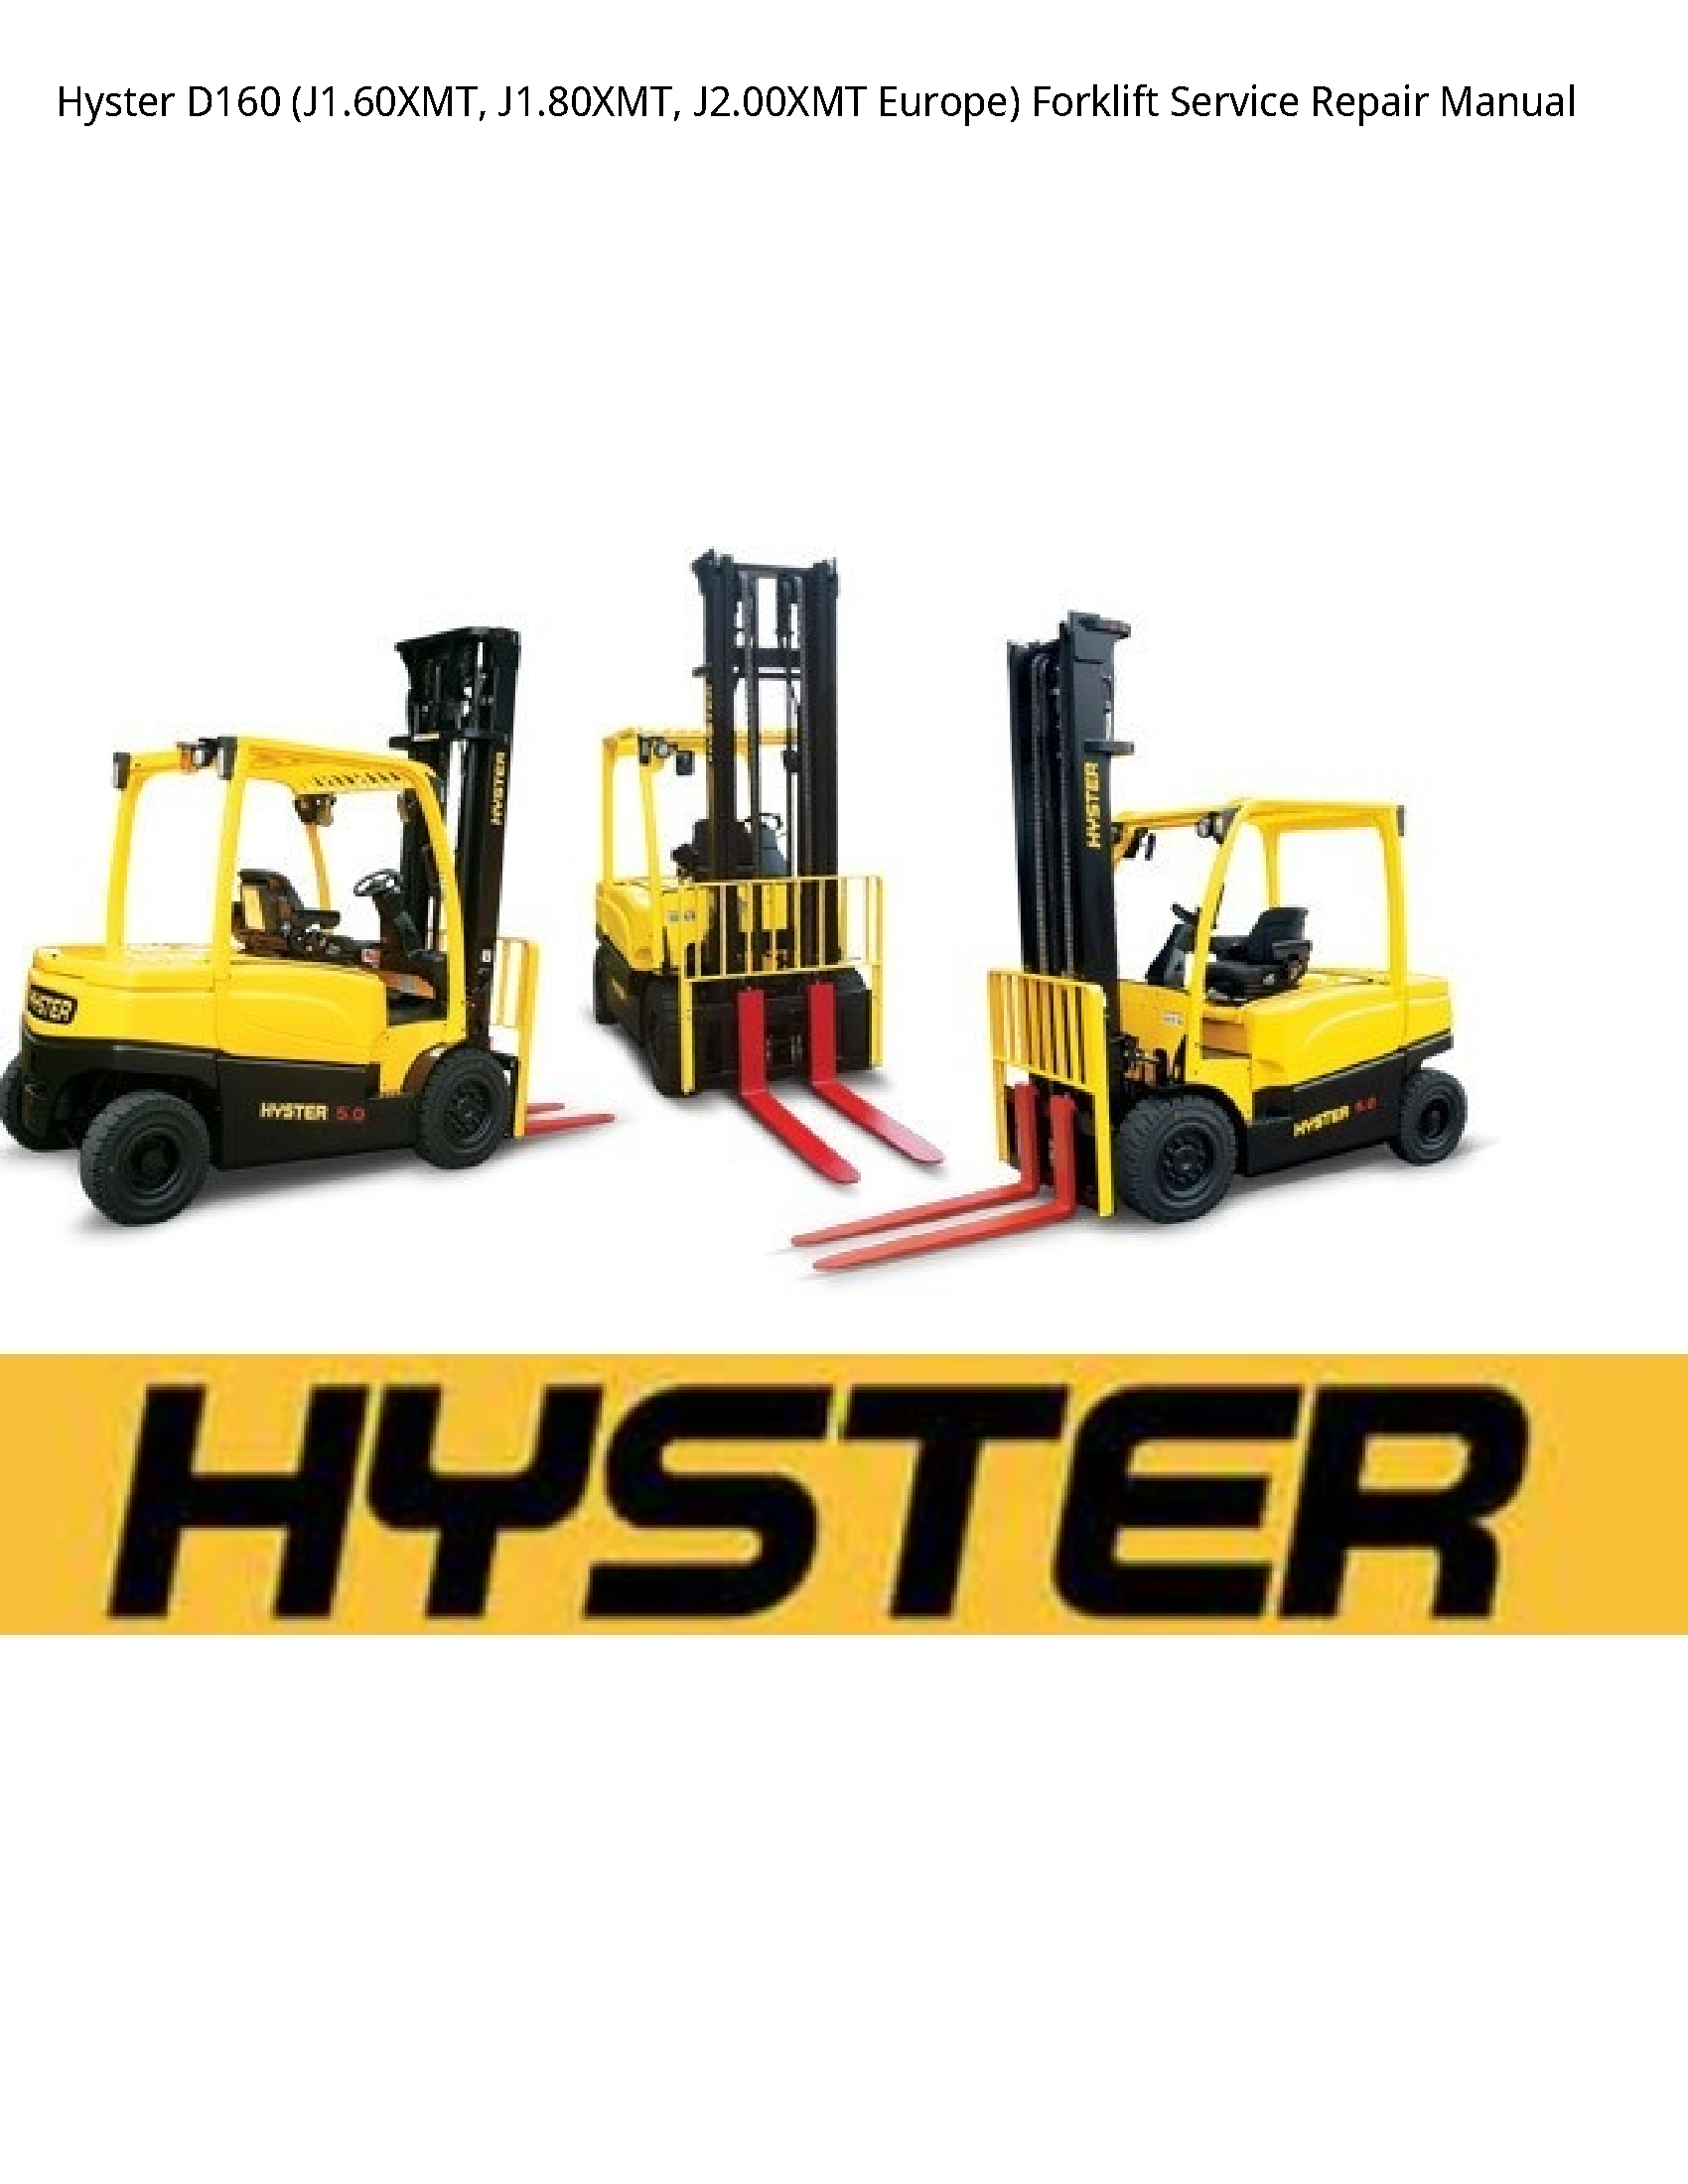 Hyster D160 Europe) Forklift manual